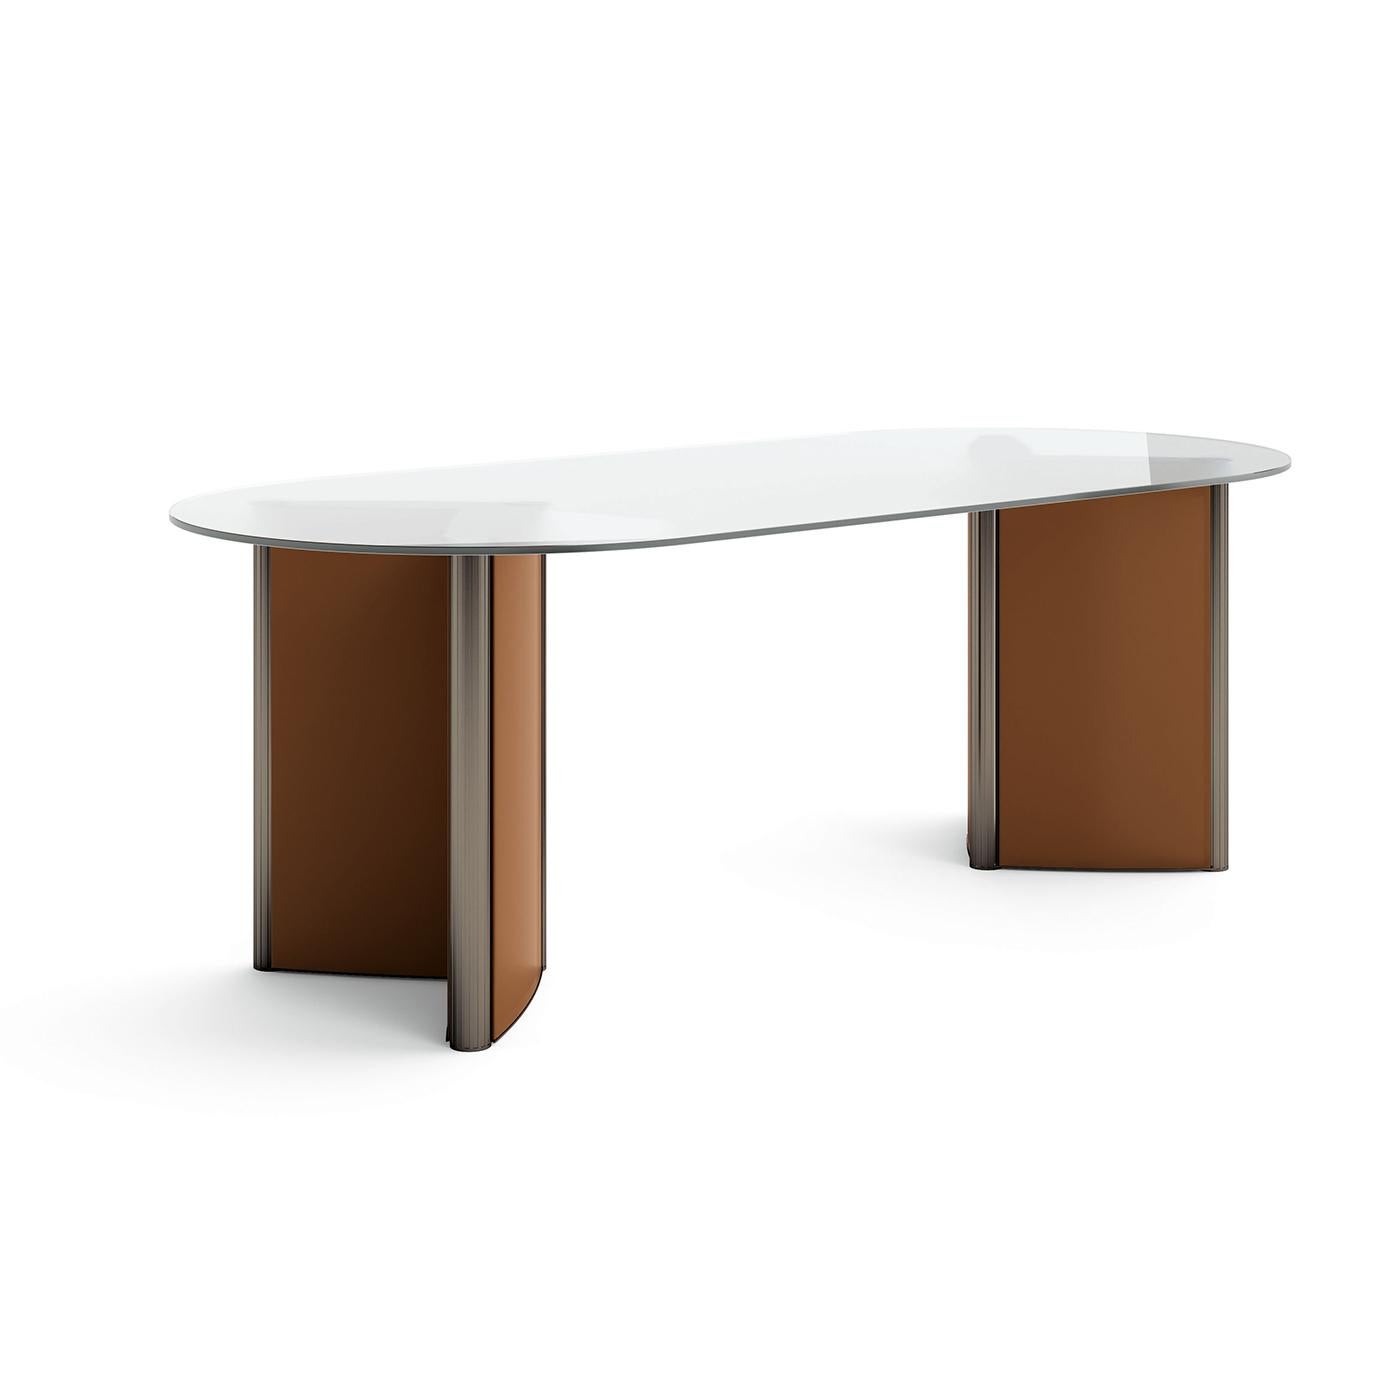 Designed for presidential offices, this desk's large scale conveys a sense of importance. The soft lines of its rope-colored leather desktop contrast the sharp edges of its dark Canaletto-walnut legs, making it extremely modern, sophisticated and